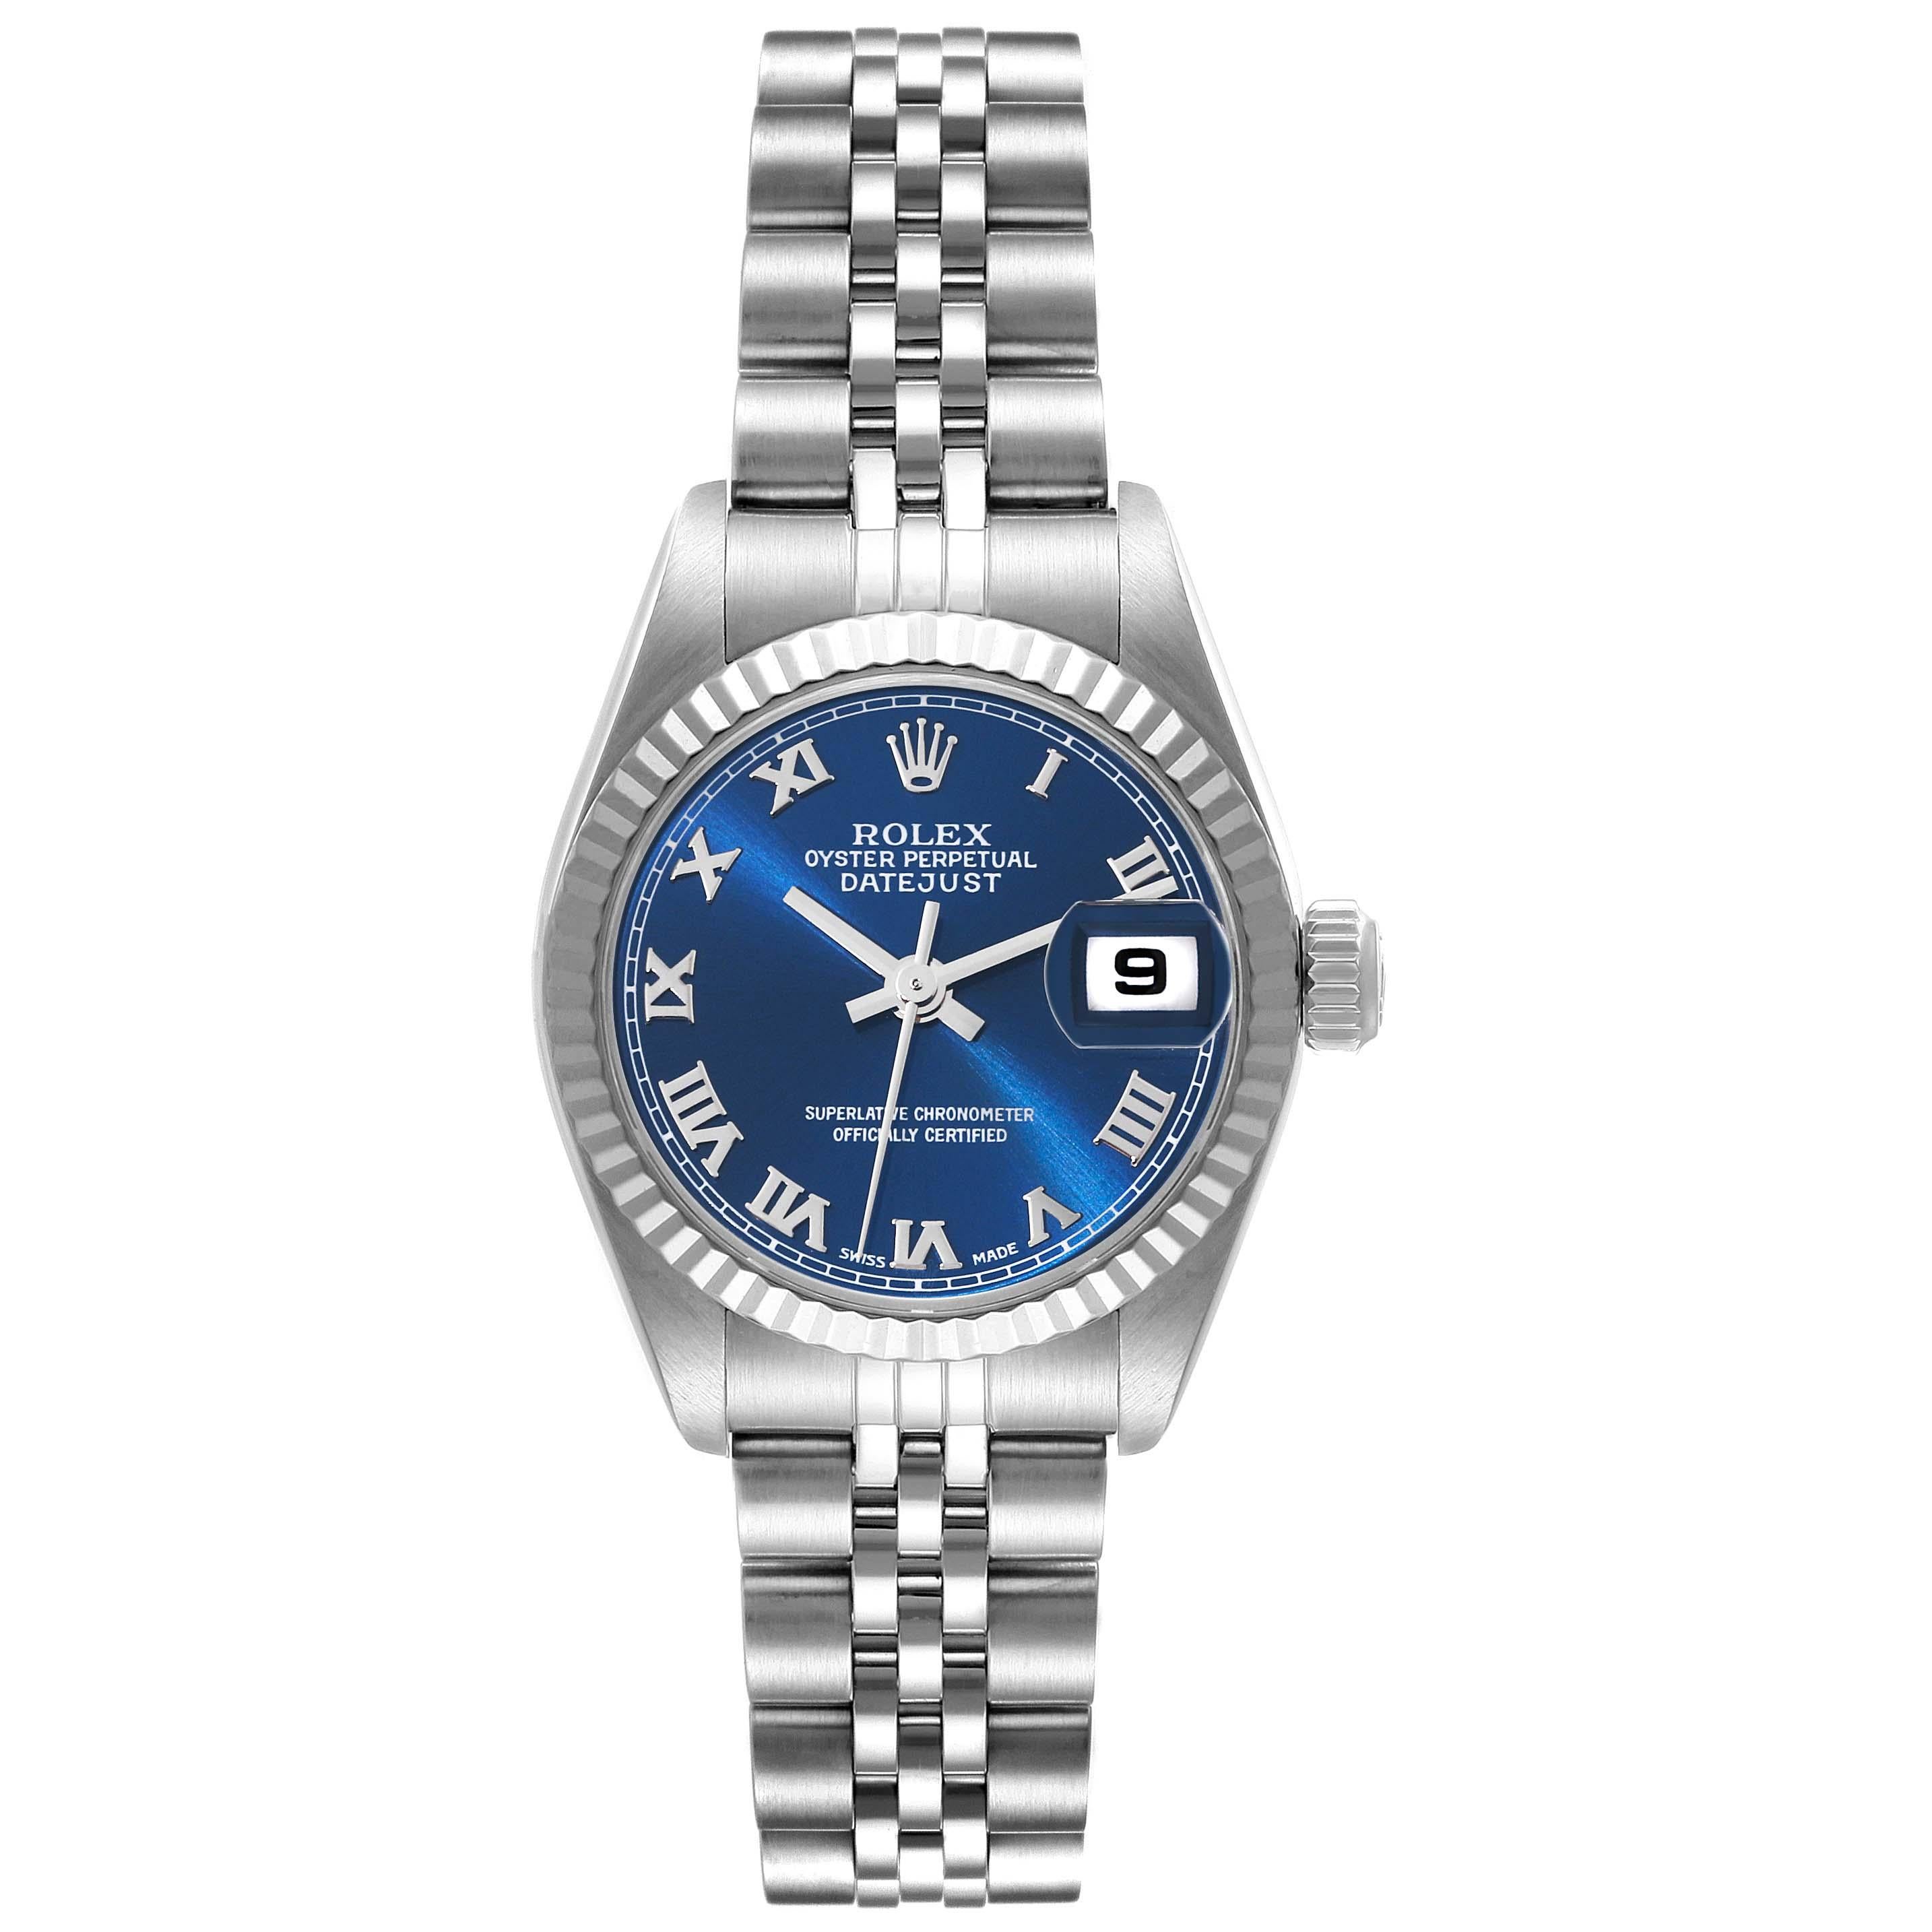 Rolex Datejust Blue Dial White Gold Steel Ladies Watch 79174 Box Papers. Officially certified chronometer automatic self-winding movement. Stainless steel oyster case 26.0 mm in diameter. Rolex logo on the crown. 18k white gold fluted bezel. Scratch